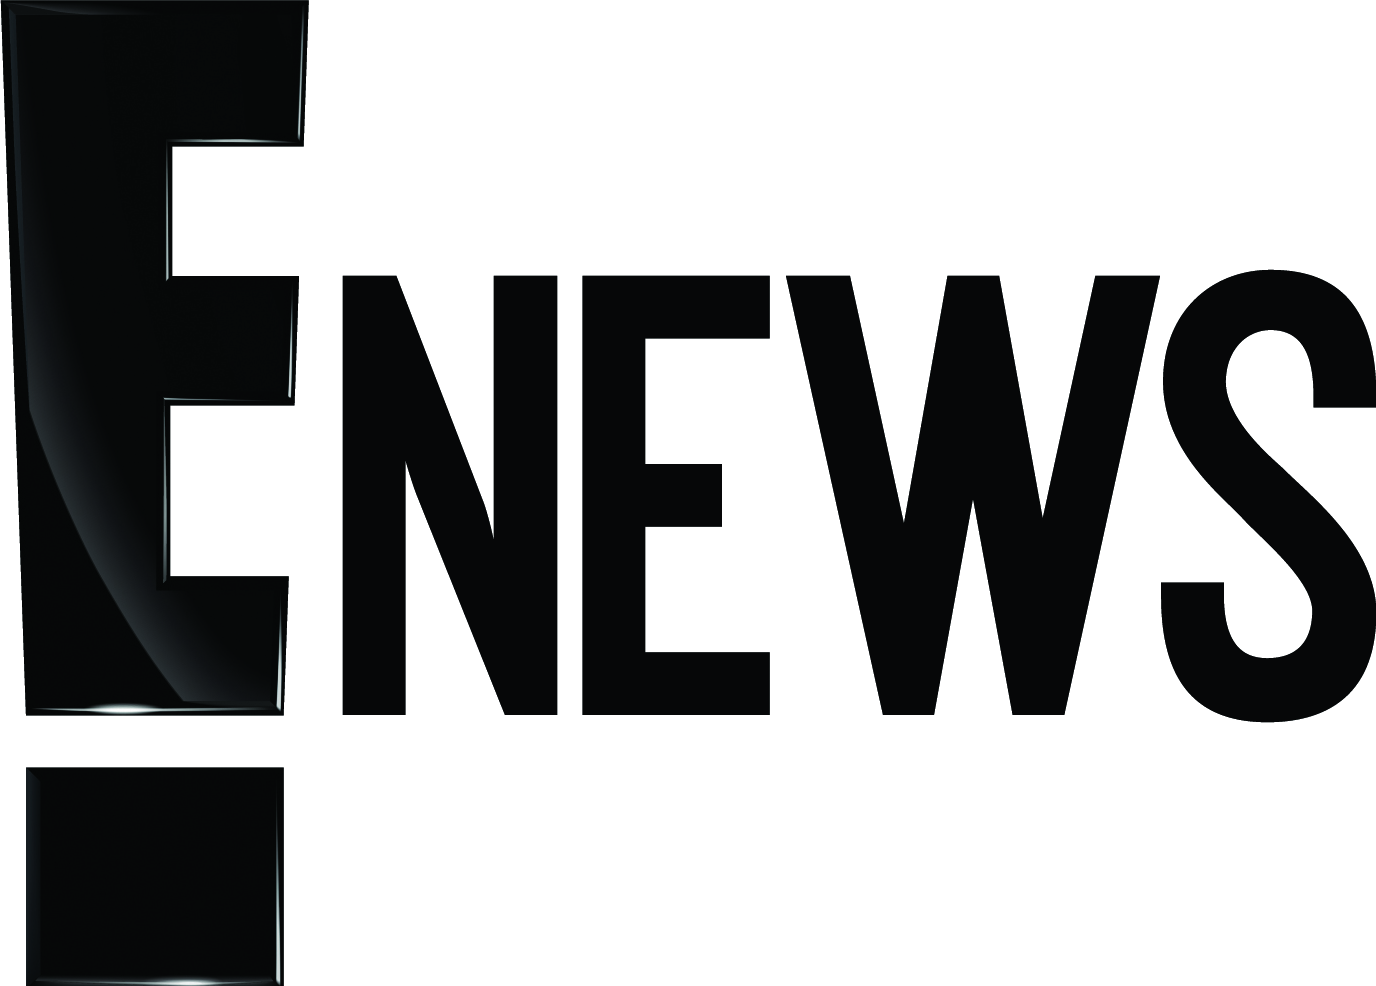 Dr. Paul Jarrod Frank of PFRANKMD in New York City featured on E! News